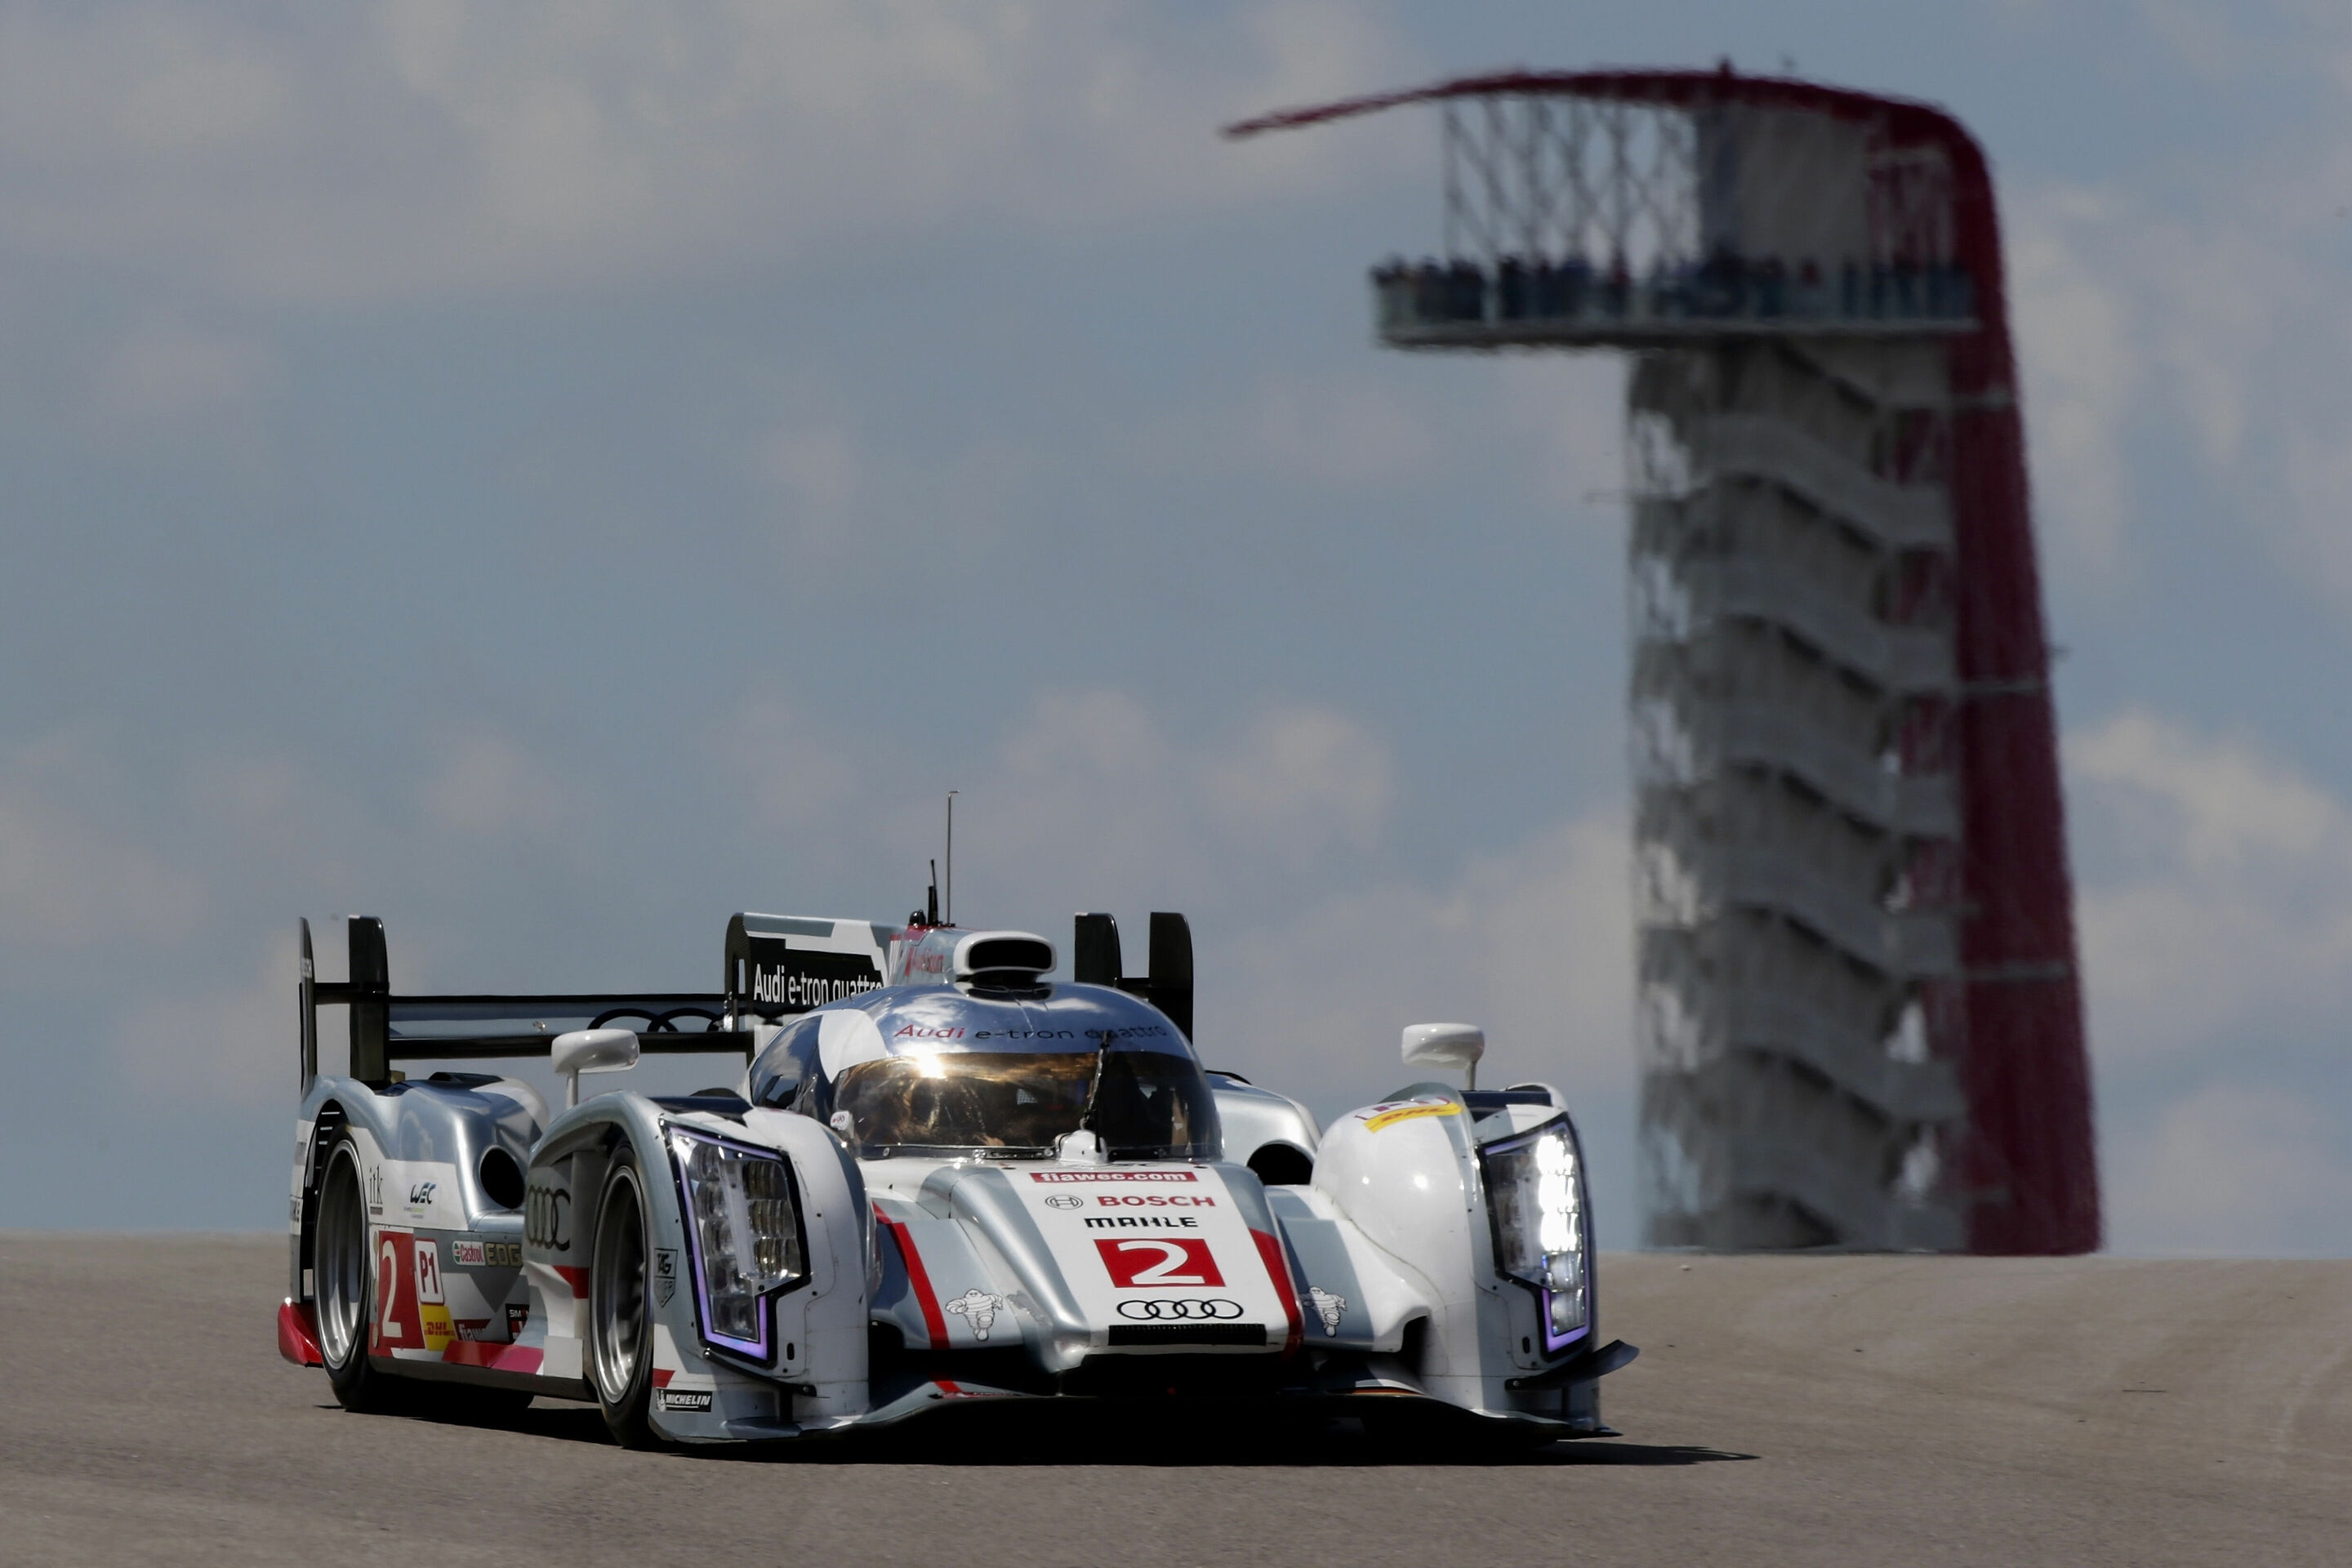 Audi clinches fourth best time in succession at Austin